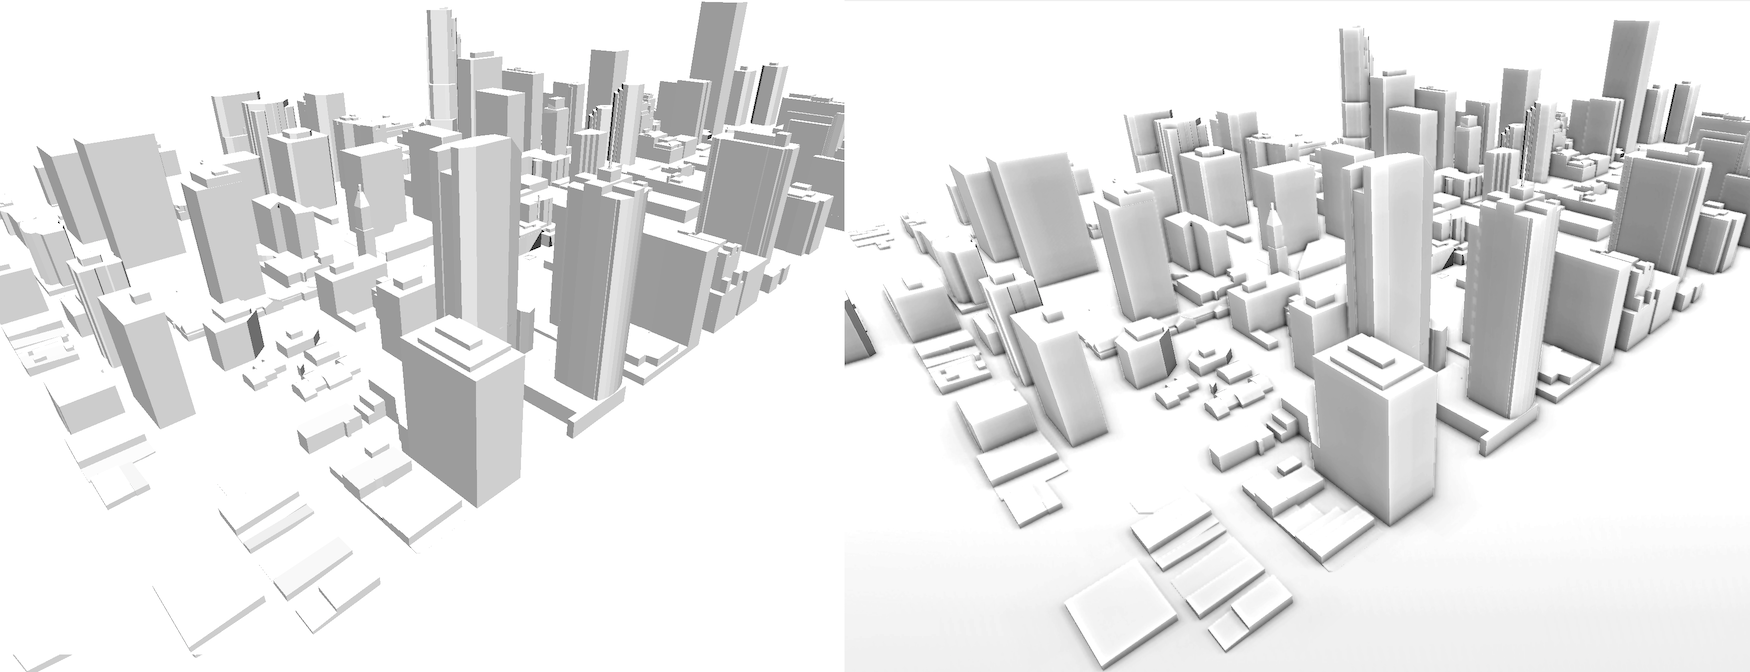 Left: ambient occlusion disabled, Right: ambient occlusion enabled